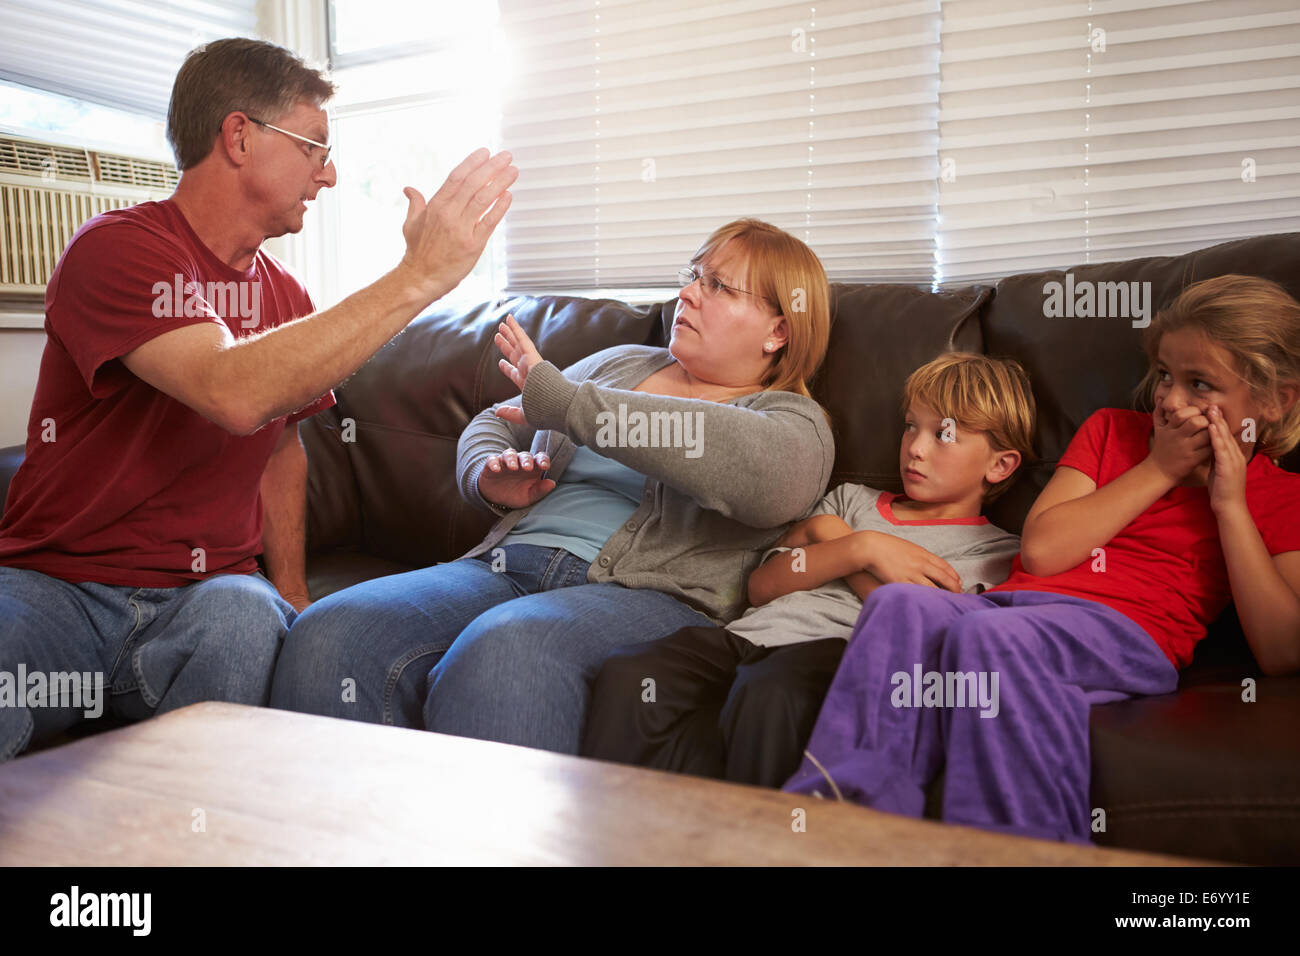 Physically Abusive Father With Family On Sofa Stock Photo